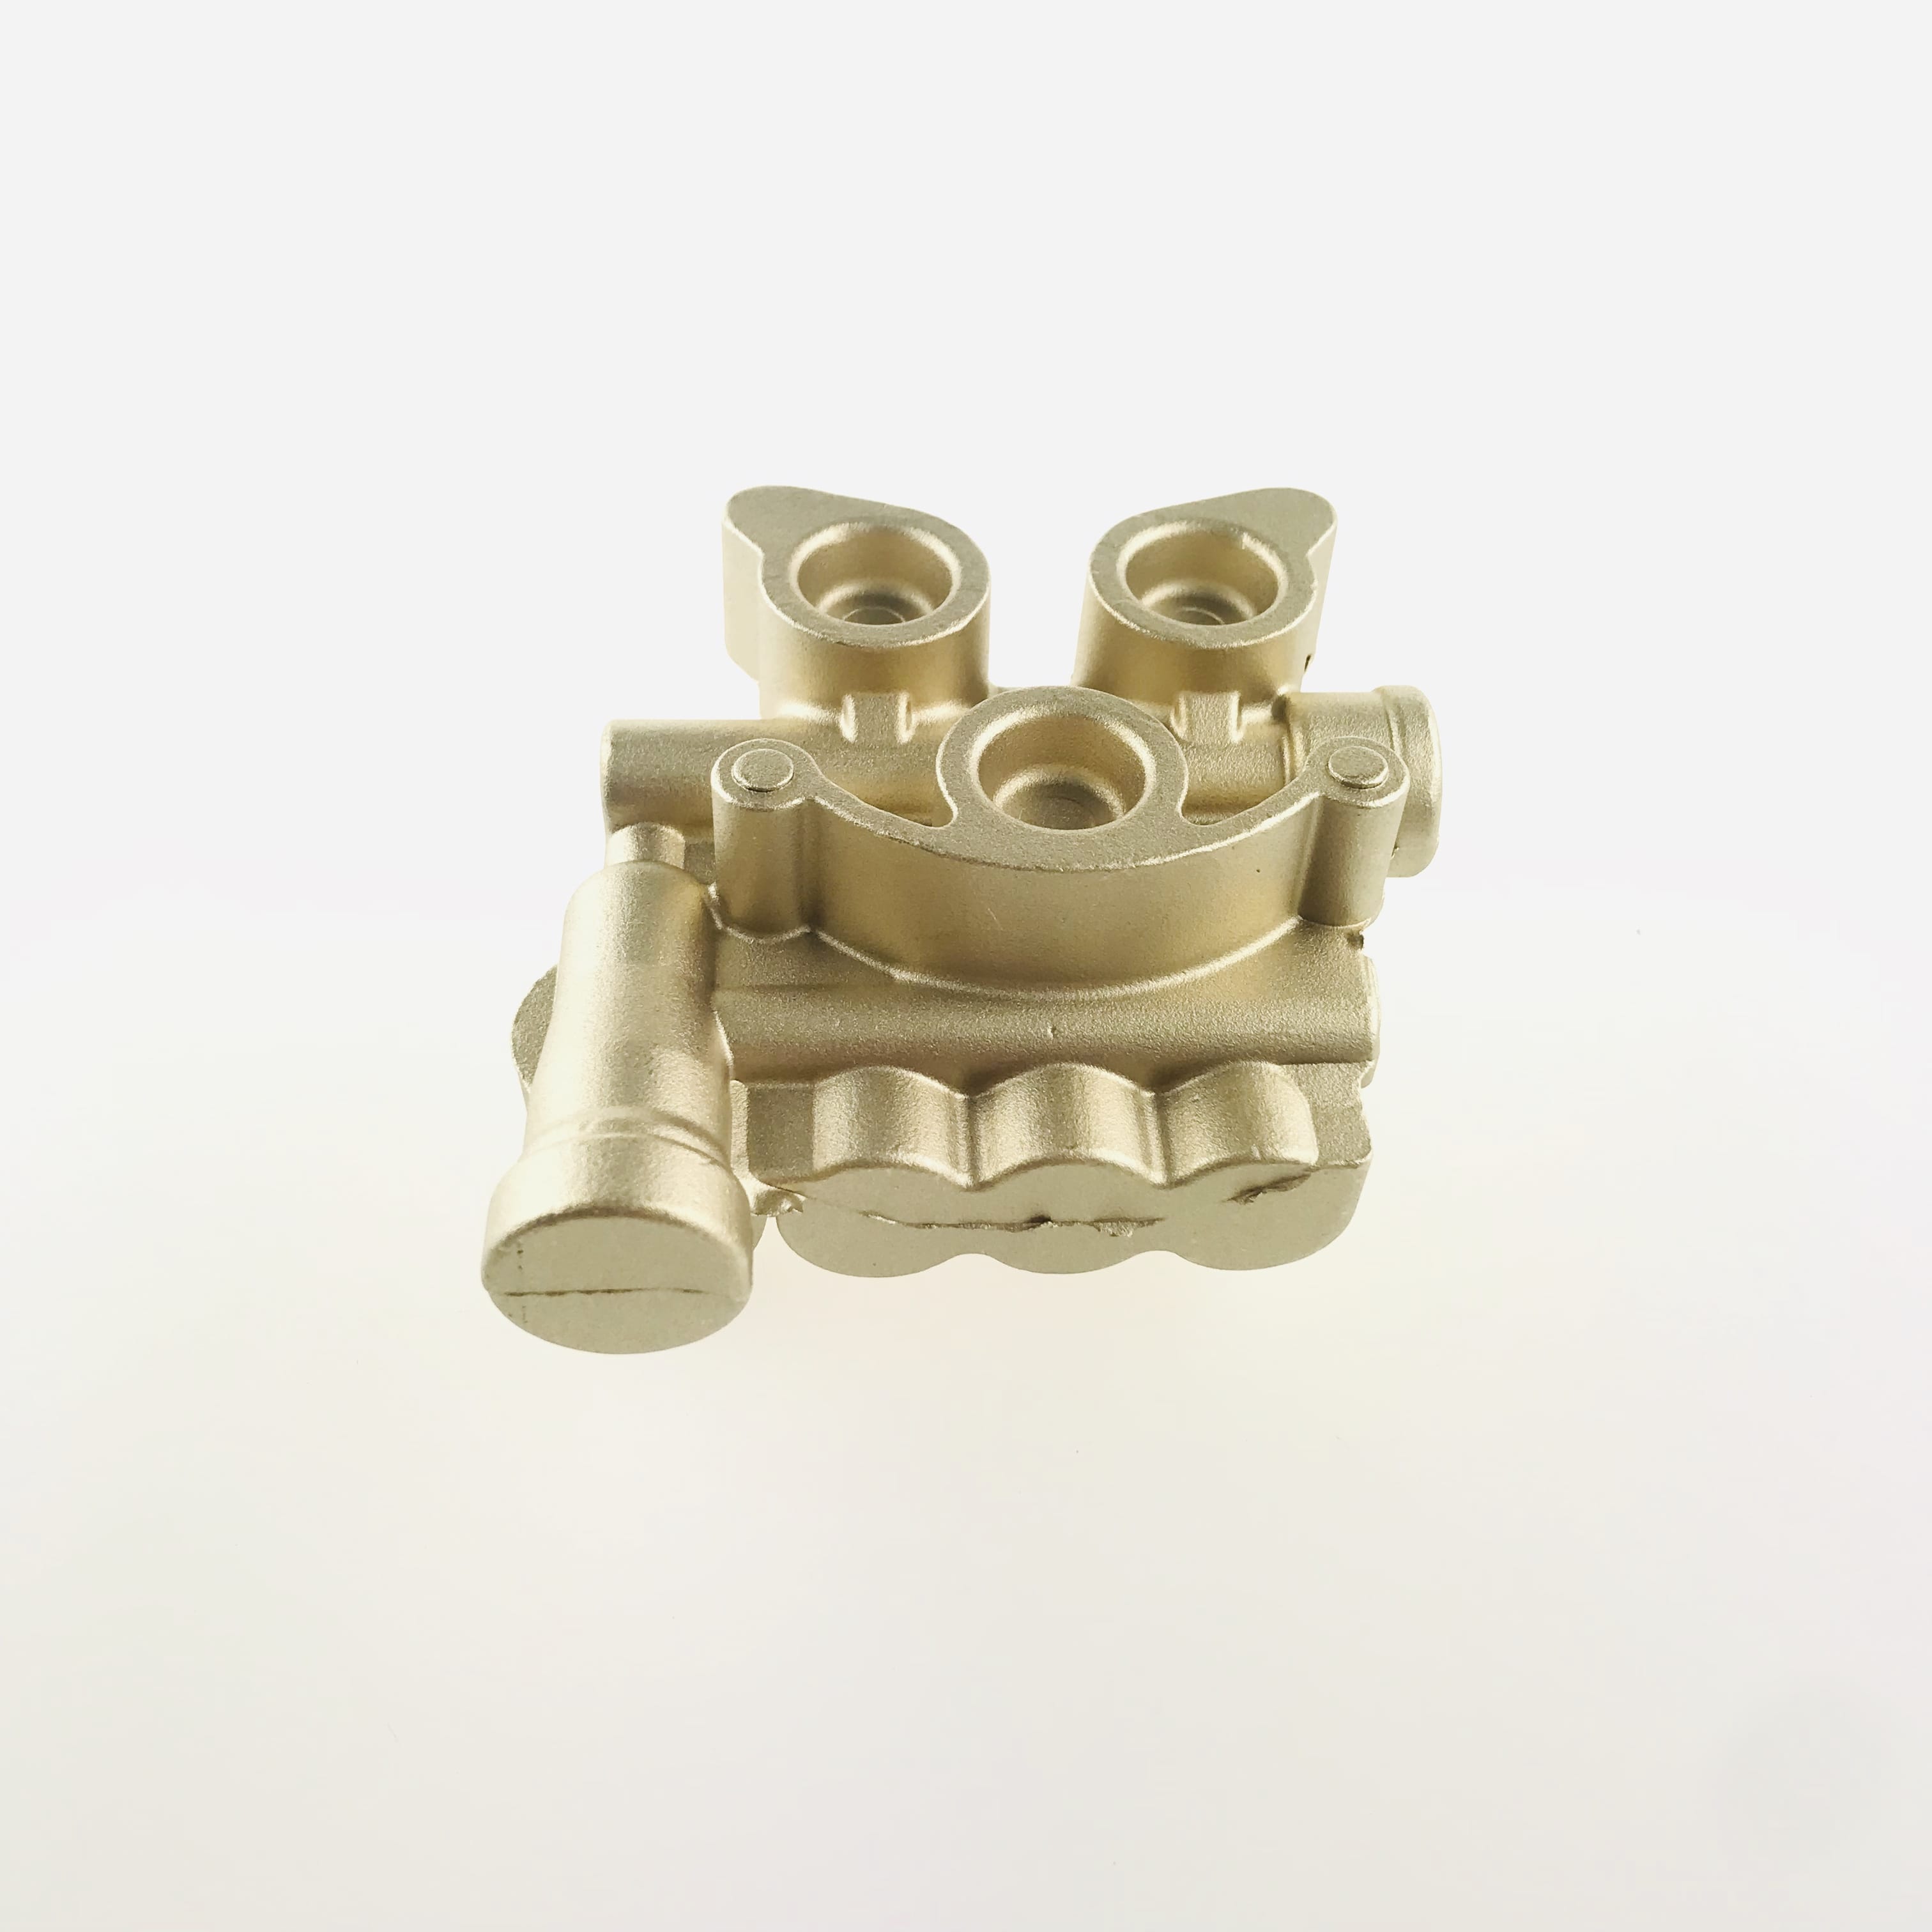 OEM Body of constant temperature product brass thread pipe fittings brass plumbing fitting brass pipe fittings  (2)